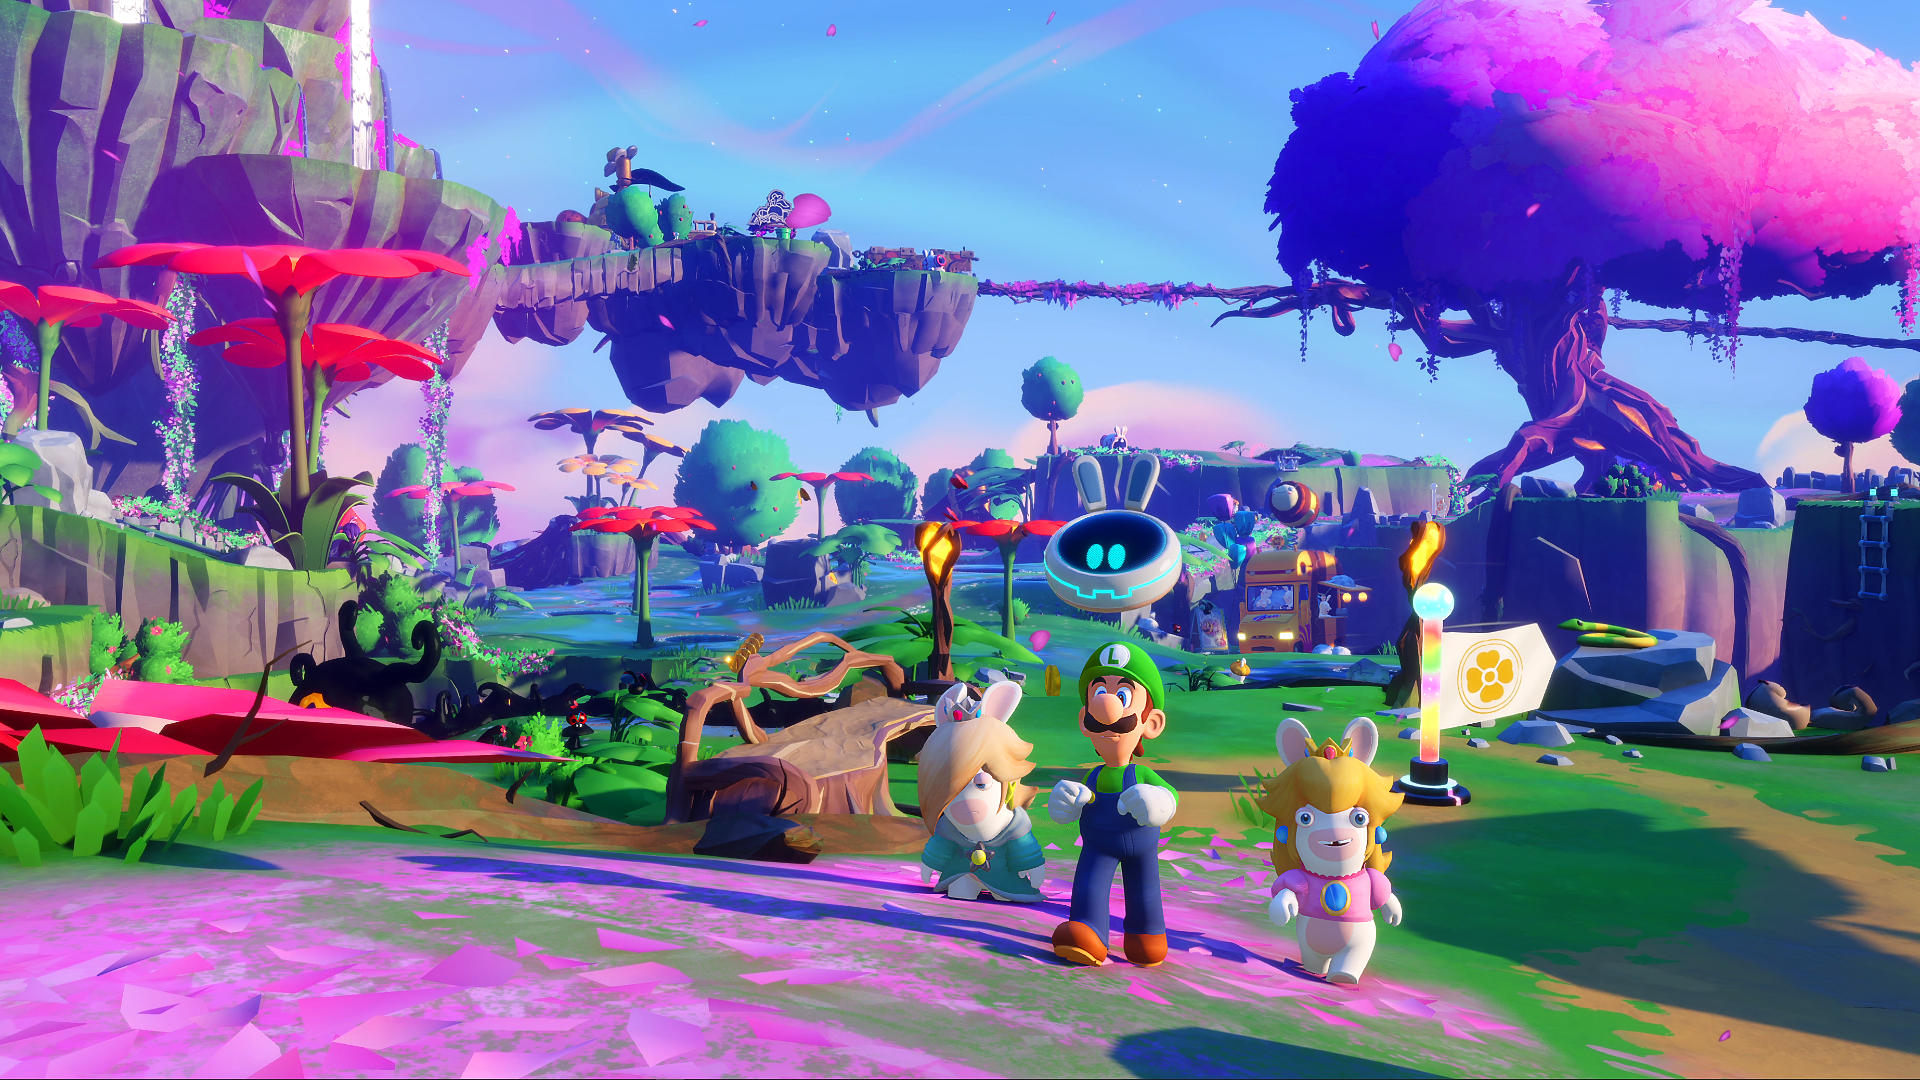 Rayman Is Joining Mario + Rabbids: Spark Of Hope As Part Of Its Season Pass